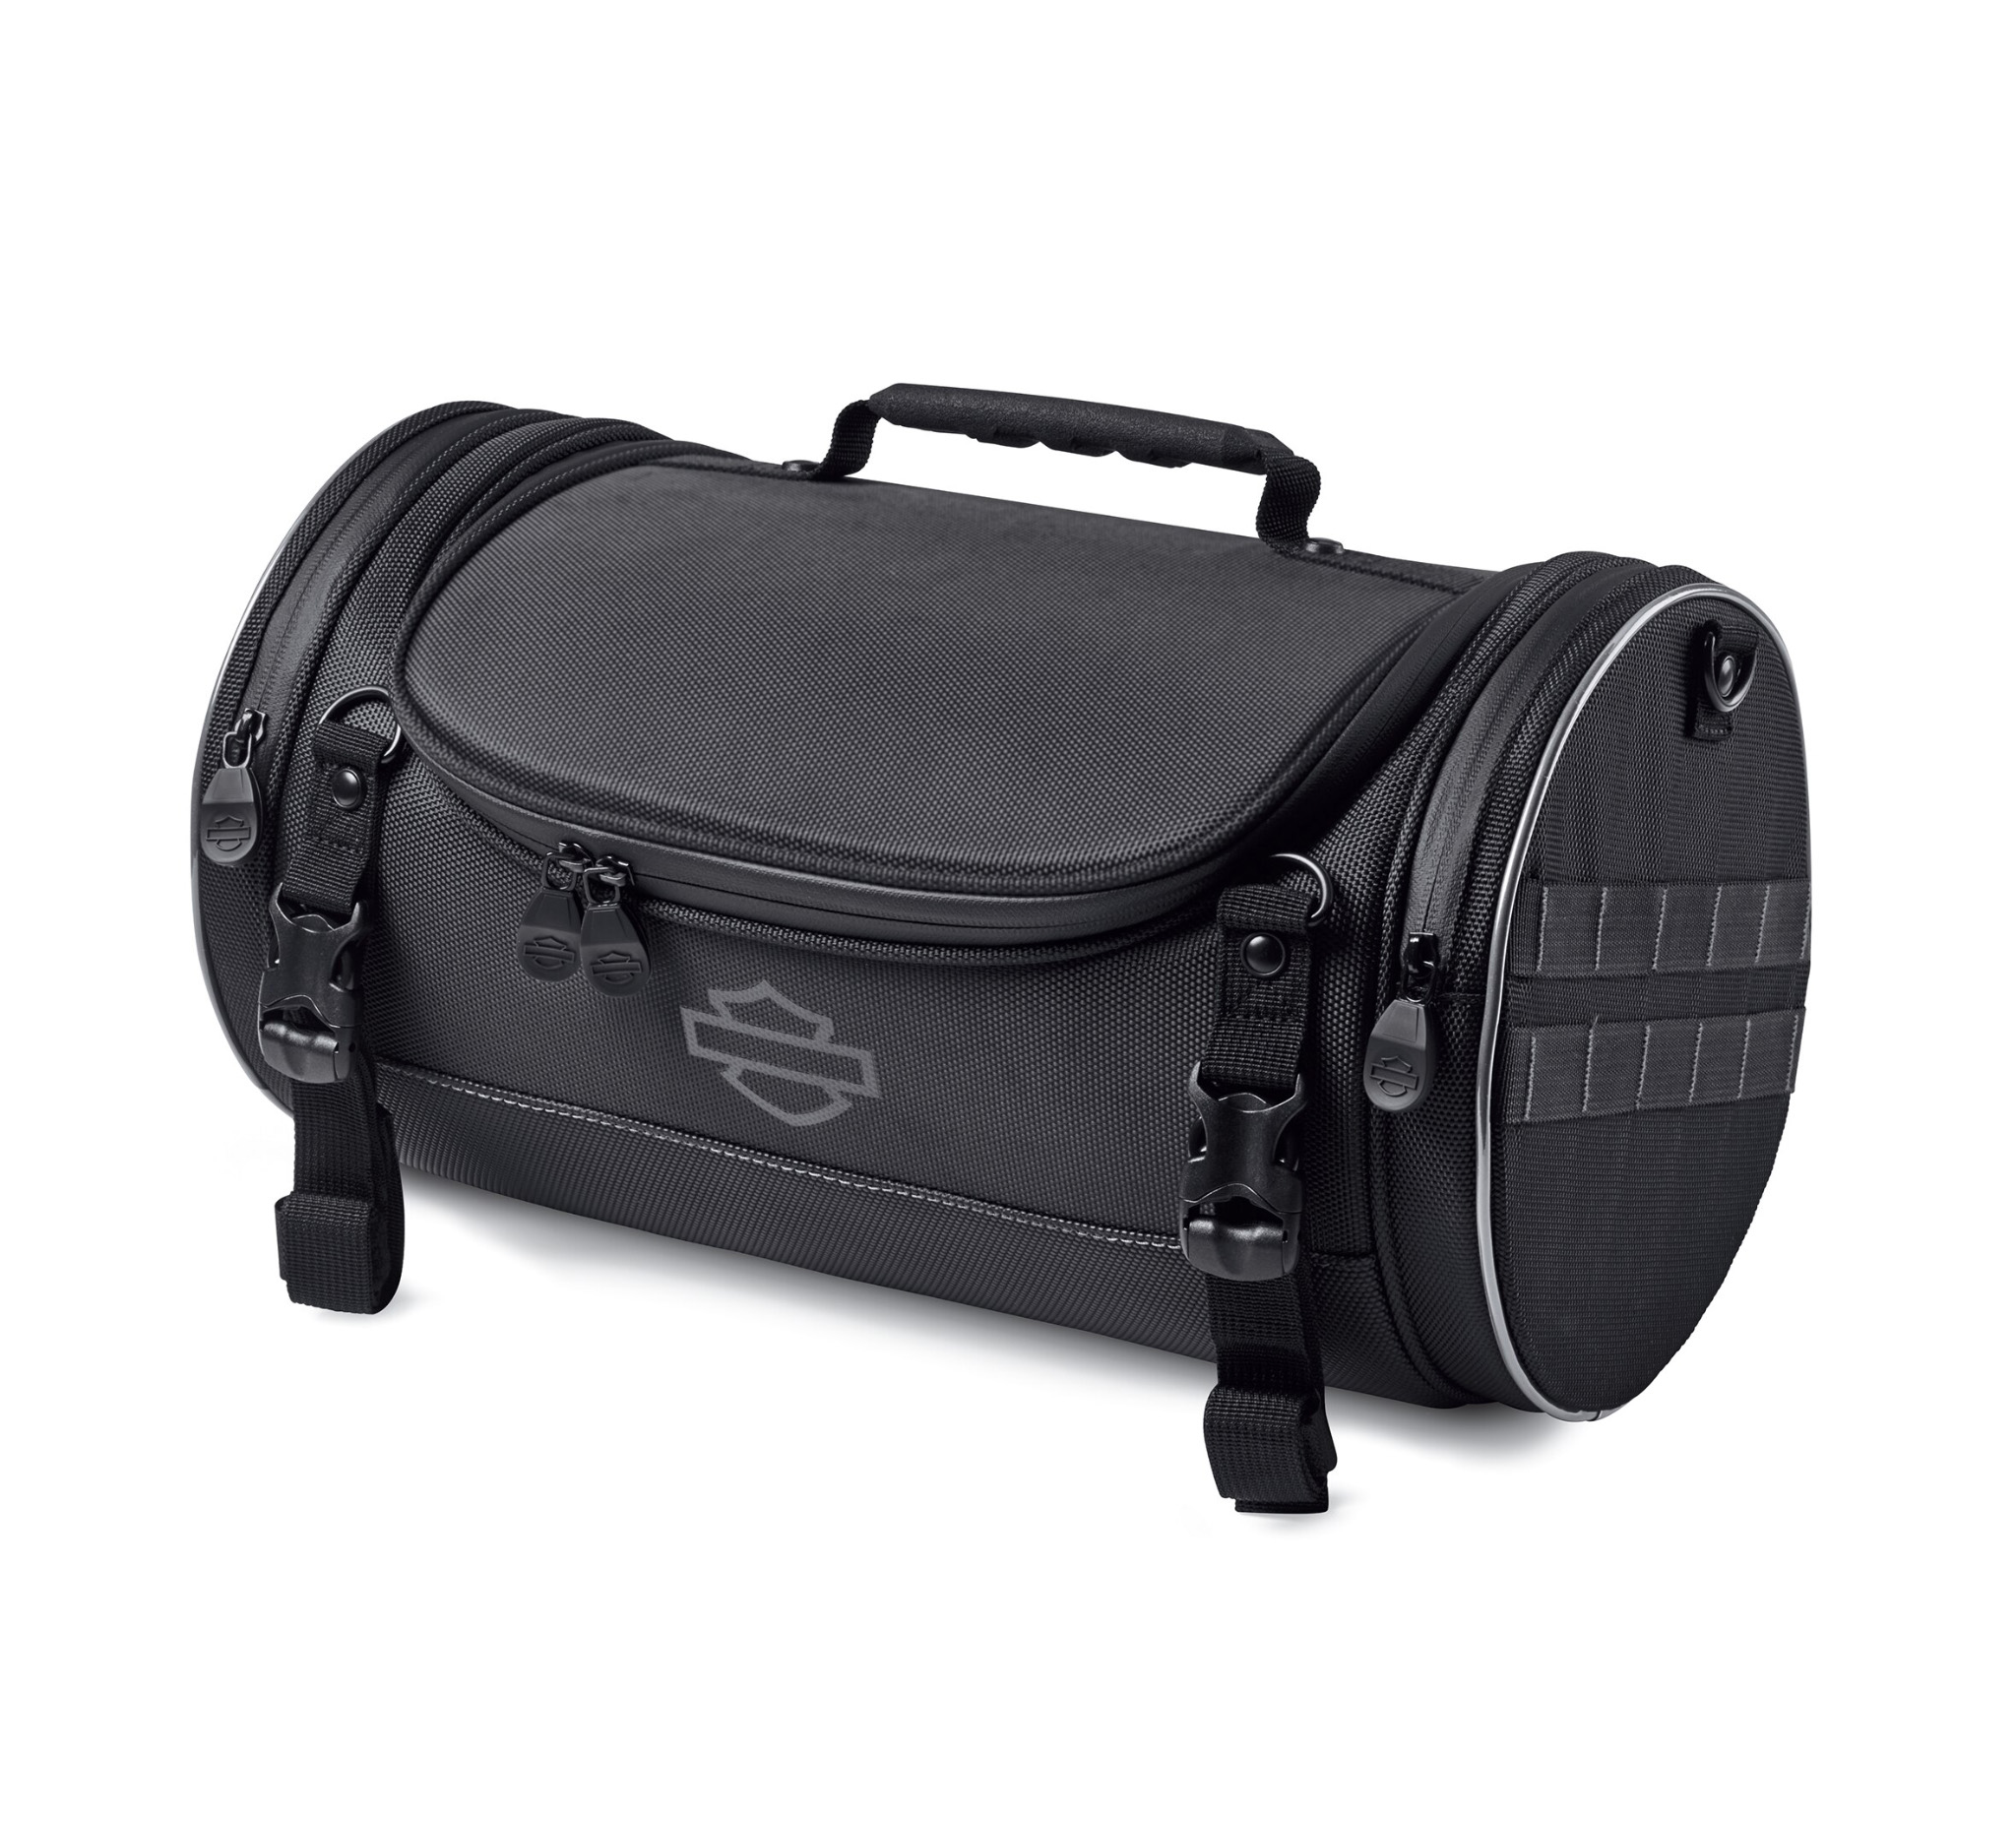 HarleyDavidson  Save on Luggage Carry ons  accessories  apparel   backpacks  and More